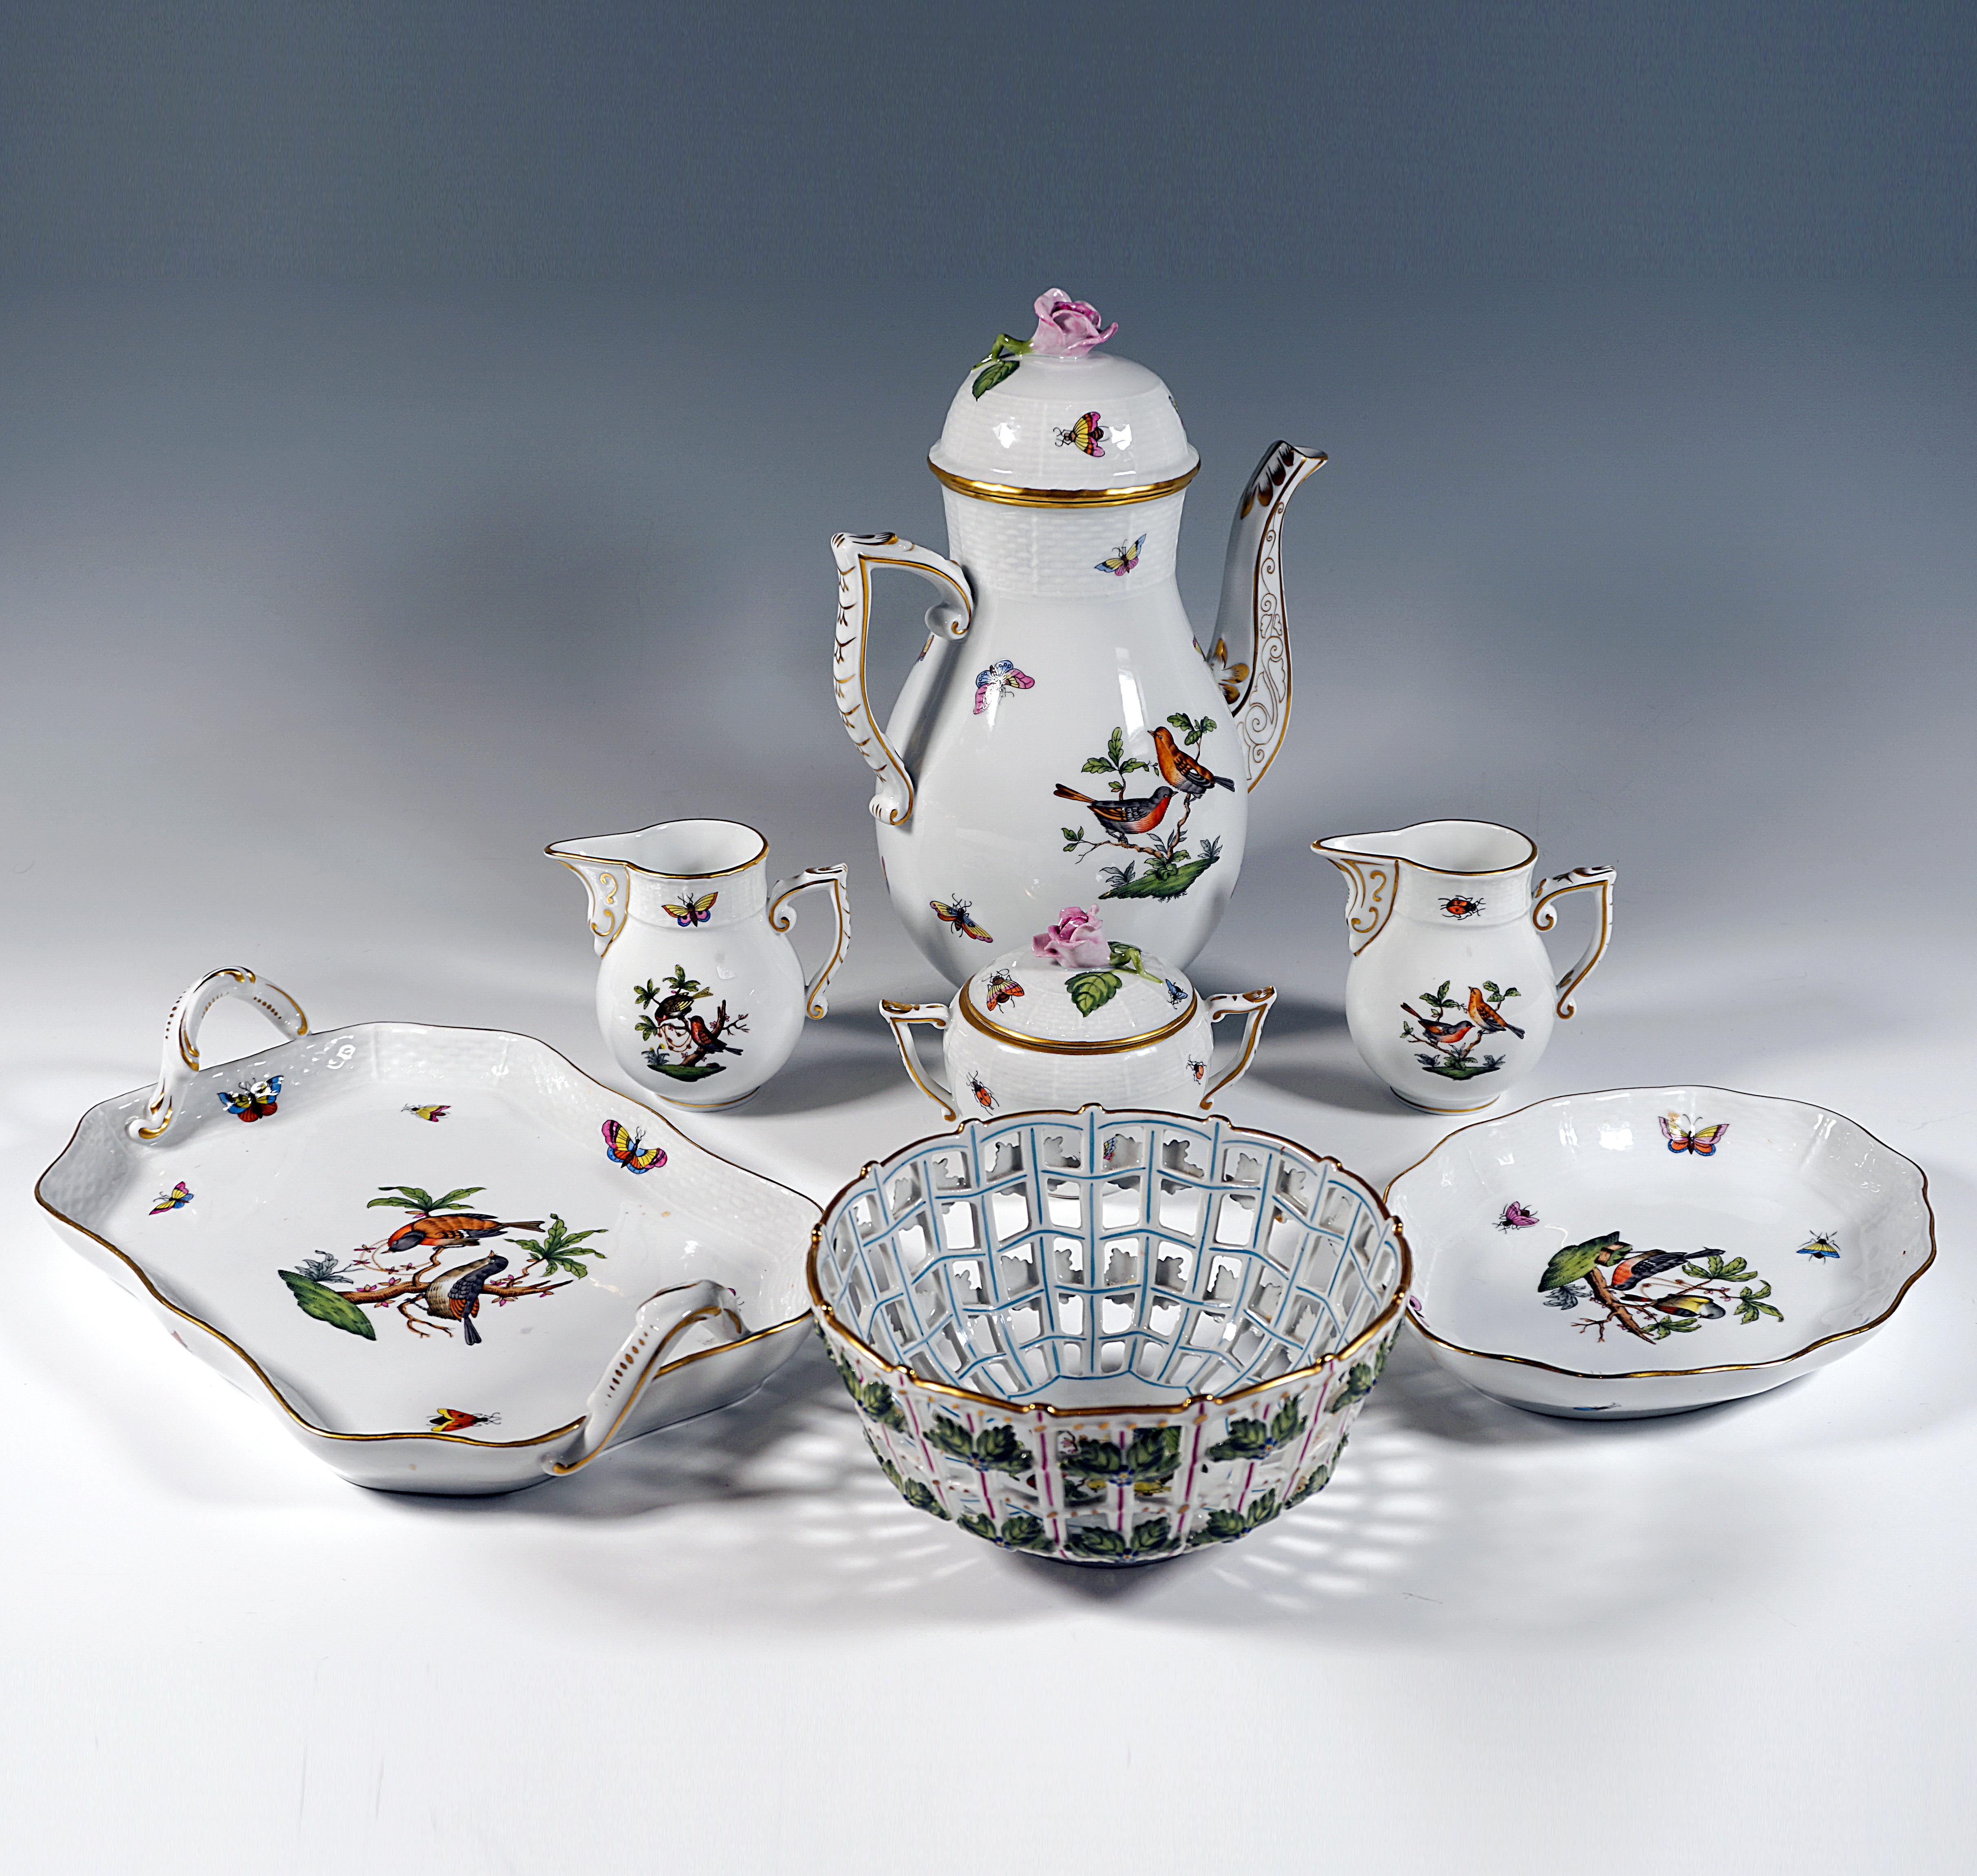 Hungarian Rothschild Oiseaux Coffee & Dessert Set For 12 Persons Herend Hungary, 20th C For Sale